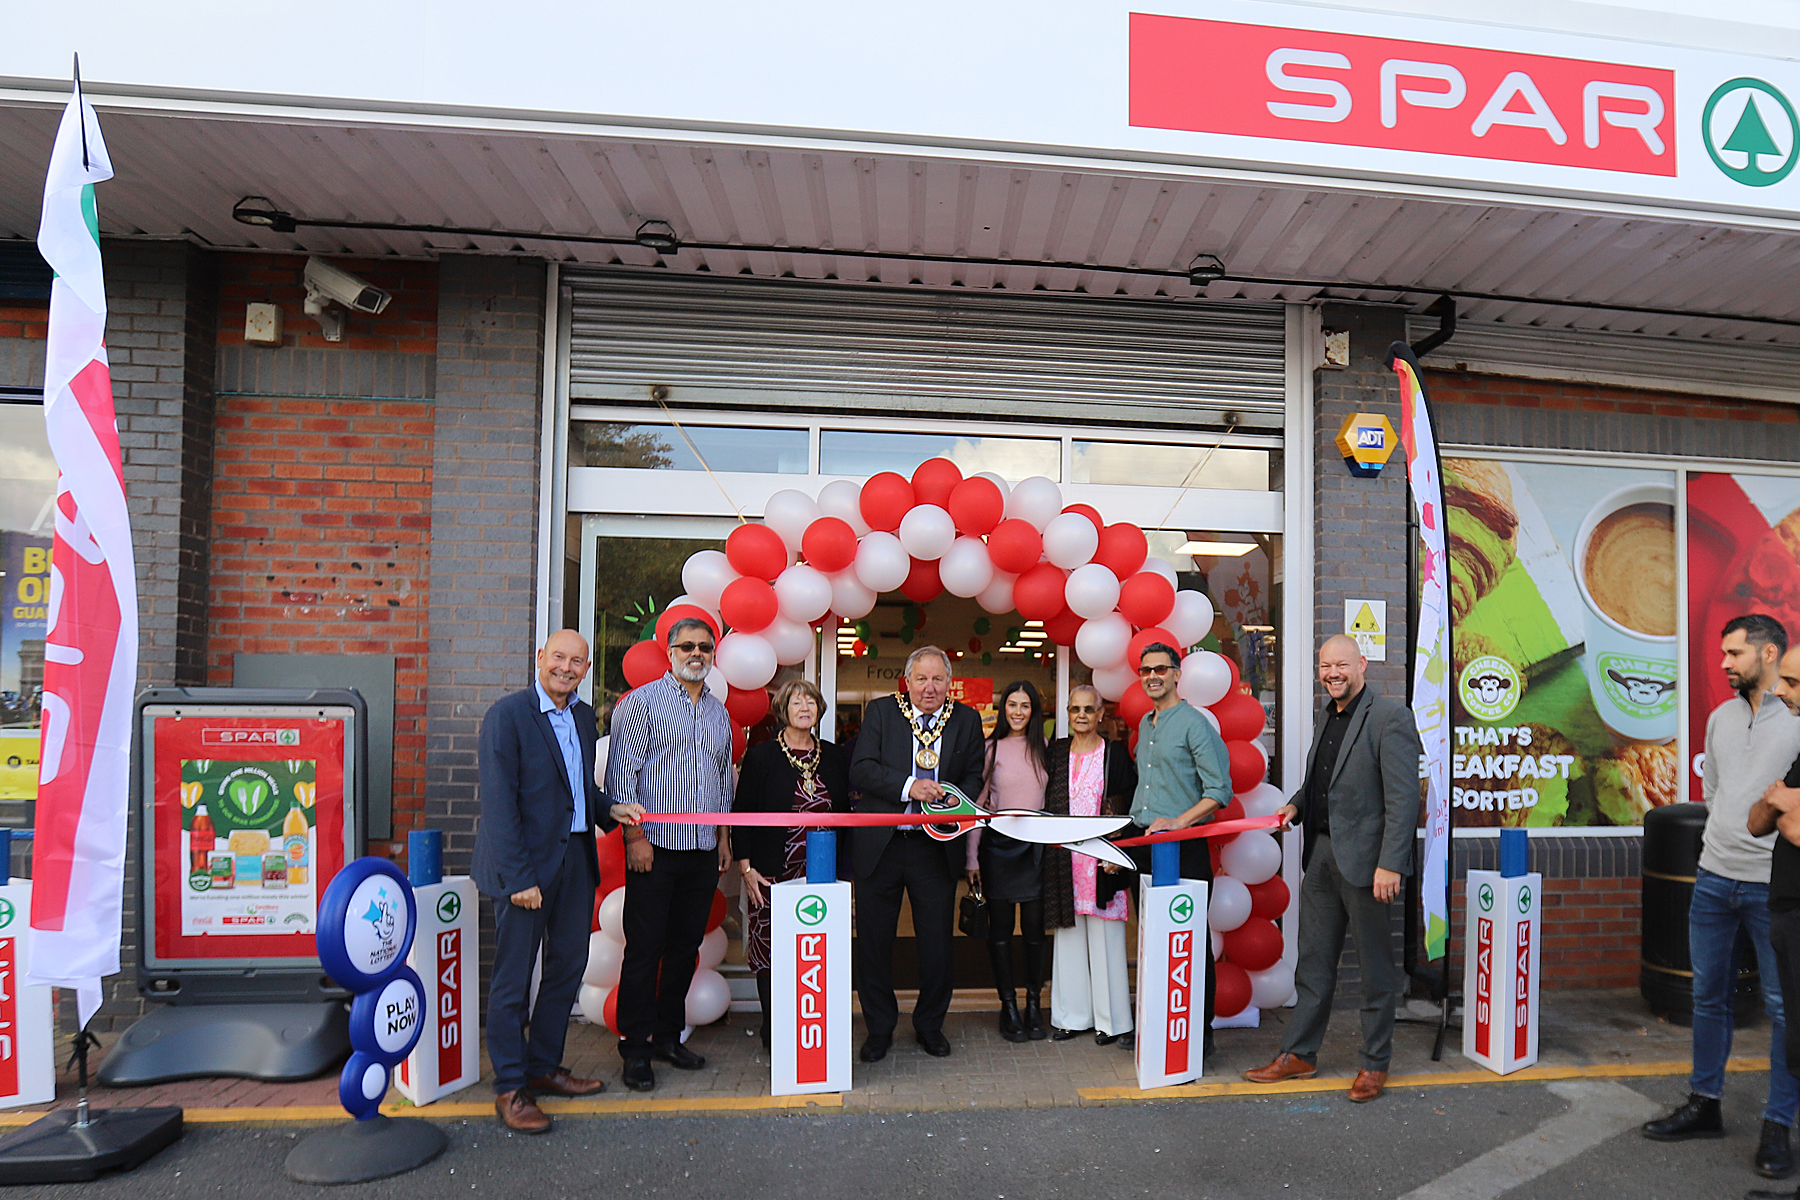 Launch of new Uppal family-owned SPAR store in Rochdale